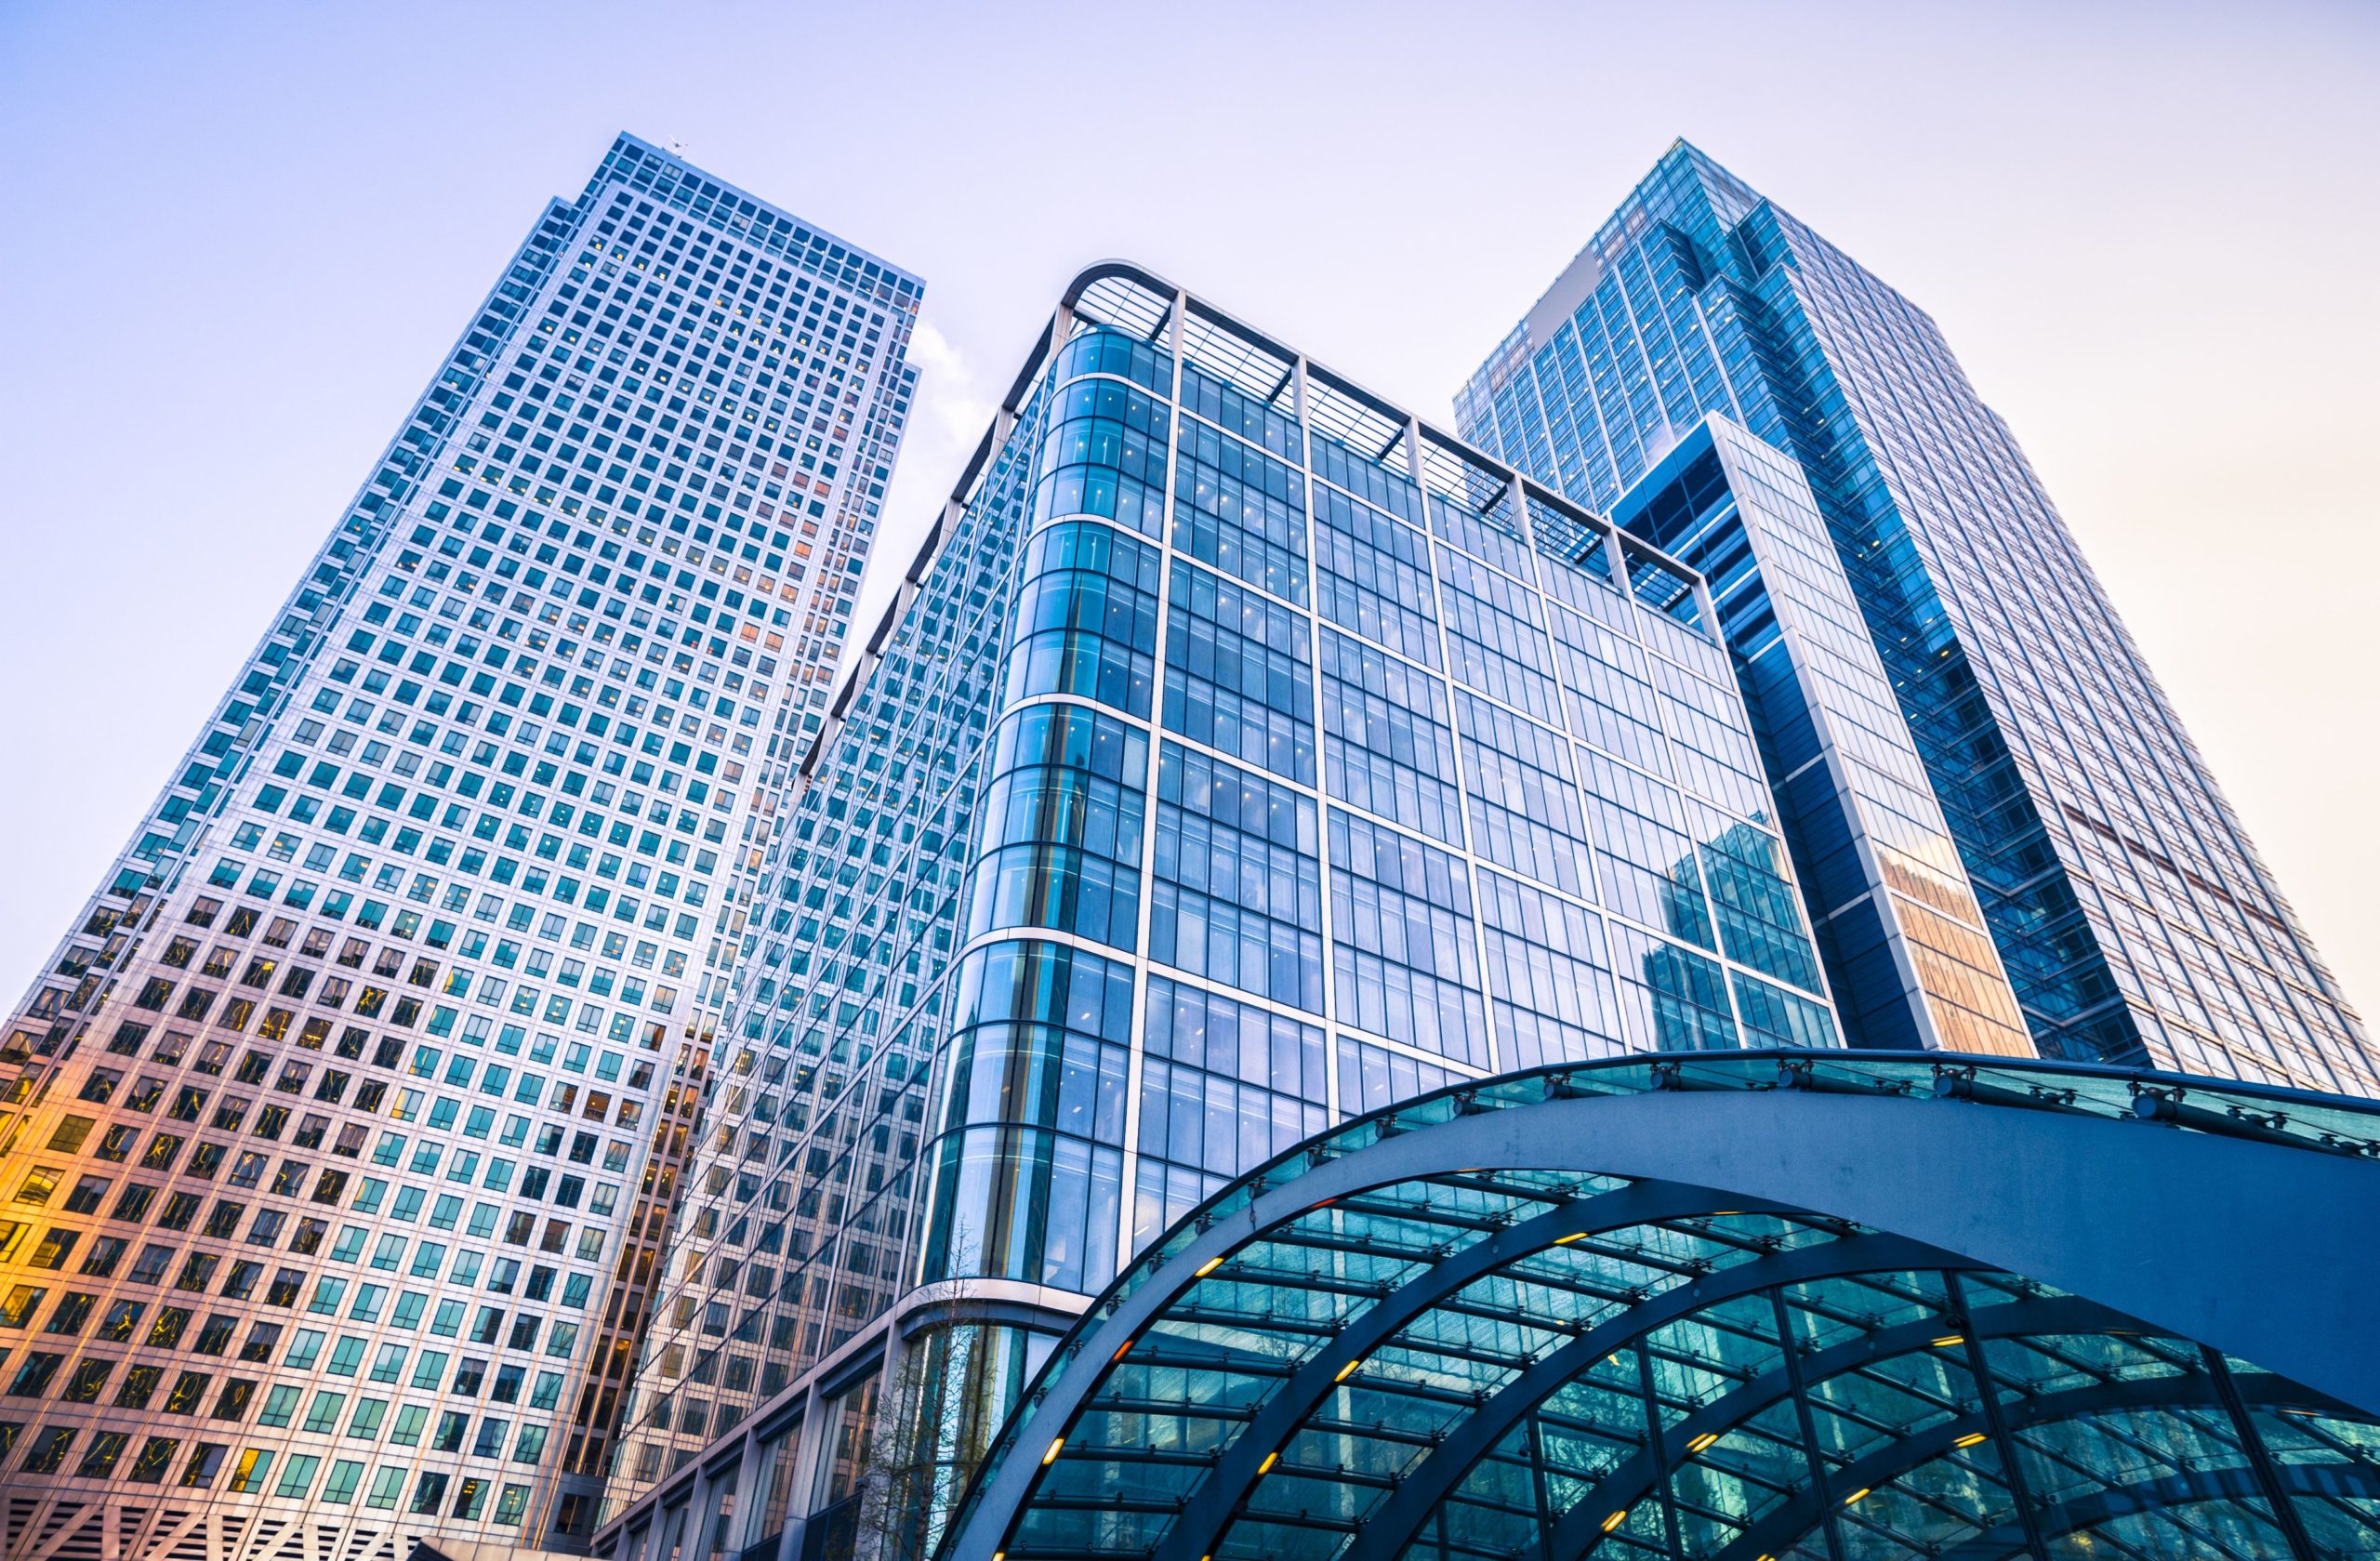 Commercial Real Estate Property Types